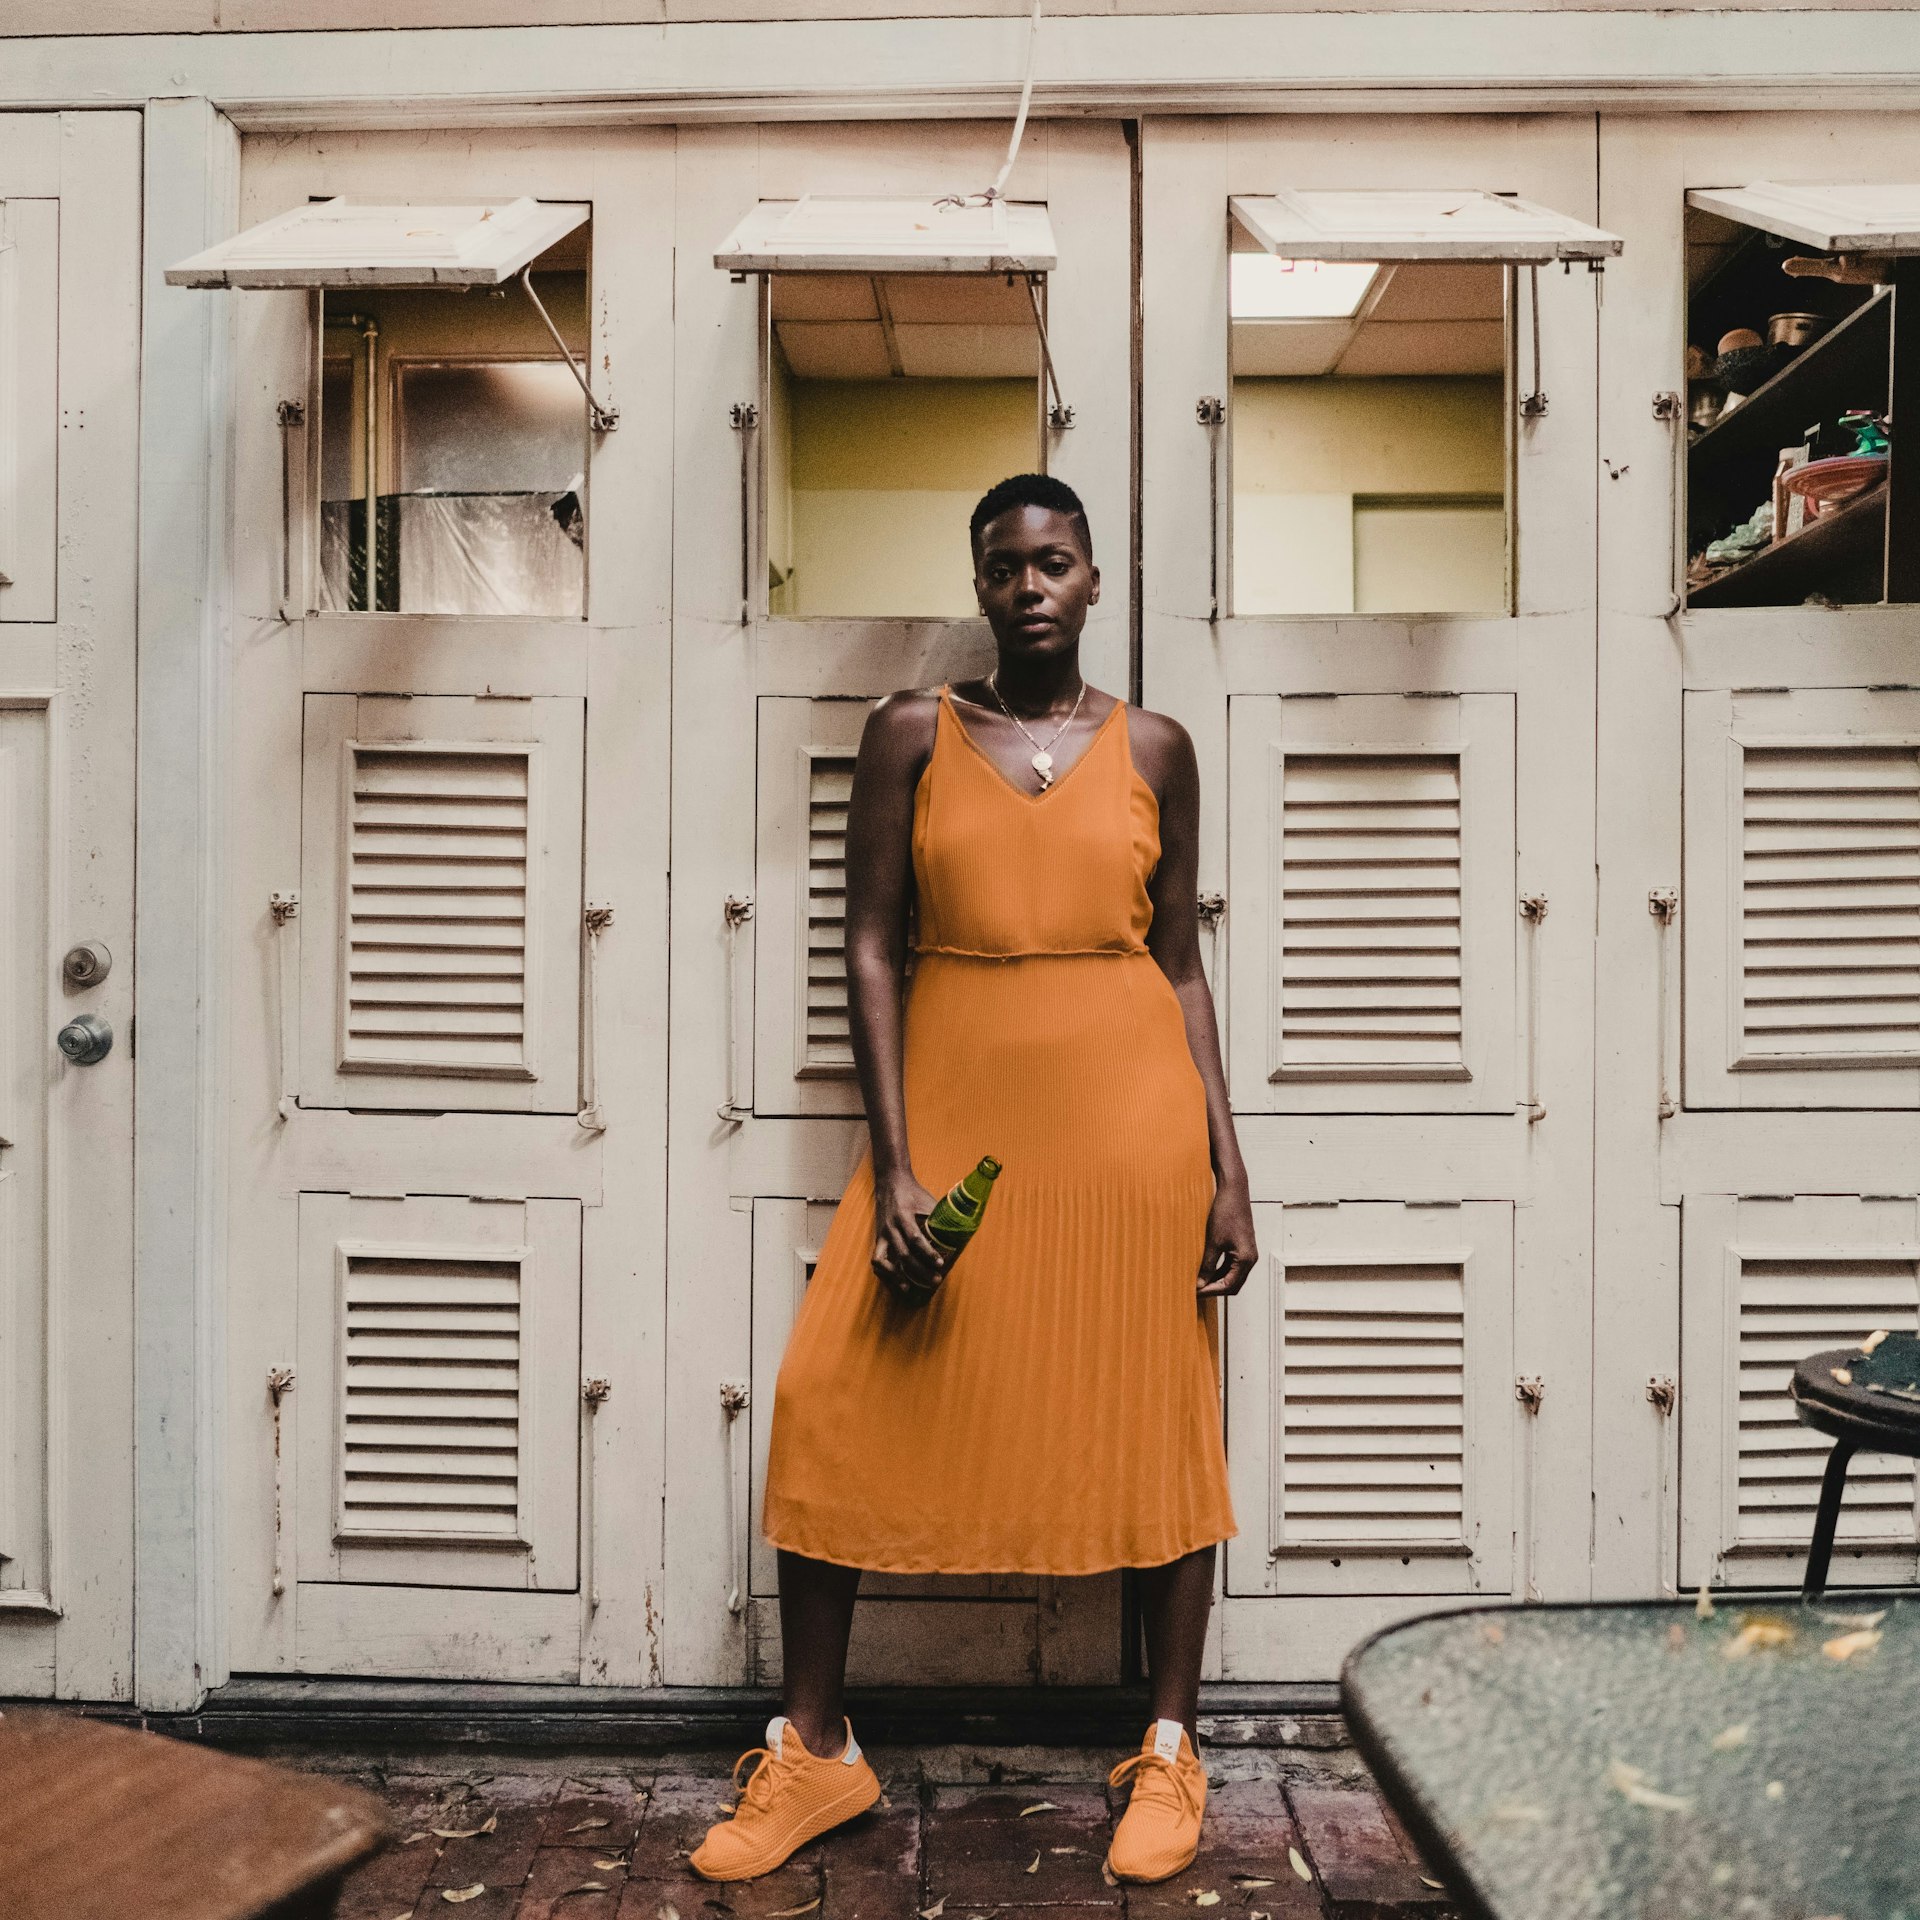 A black woman wearing an orange dress with matching sneakers poses for the camera